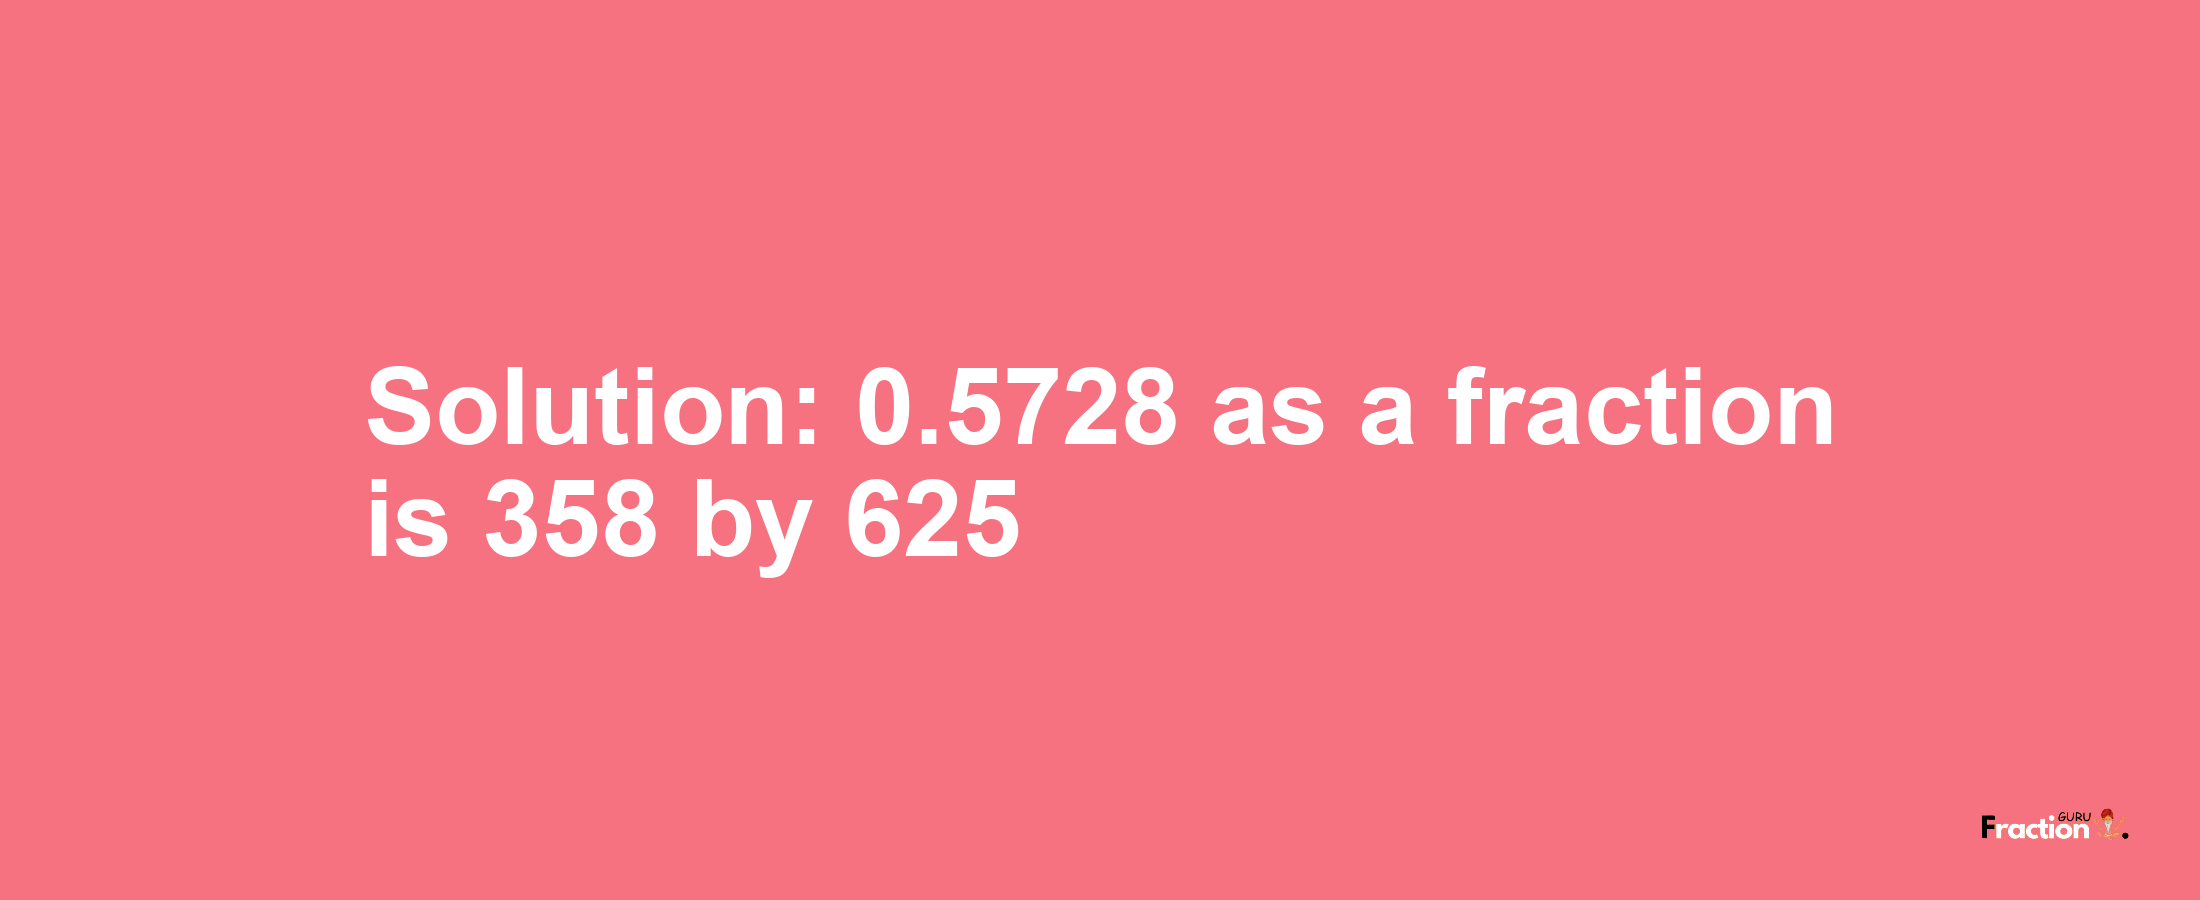 Solution:0.5728 as a fraction is 358/625